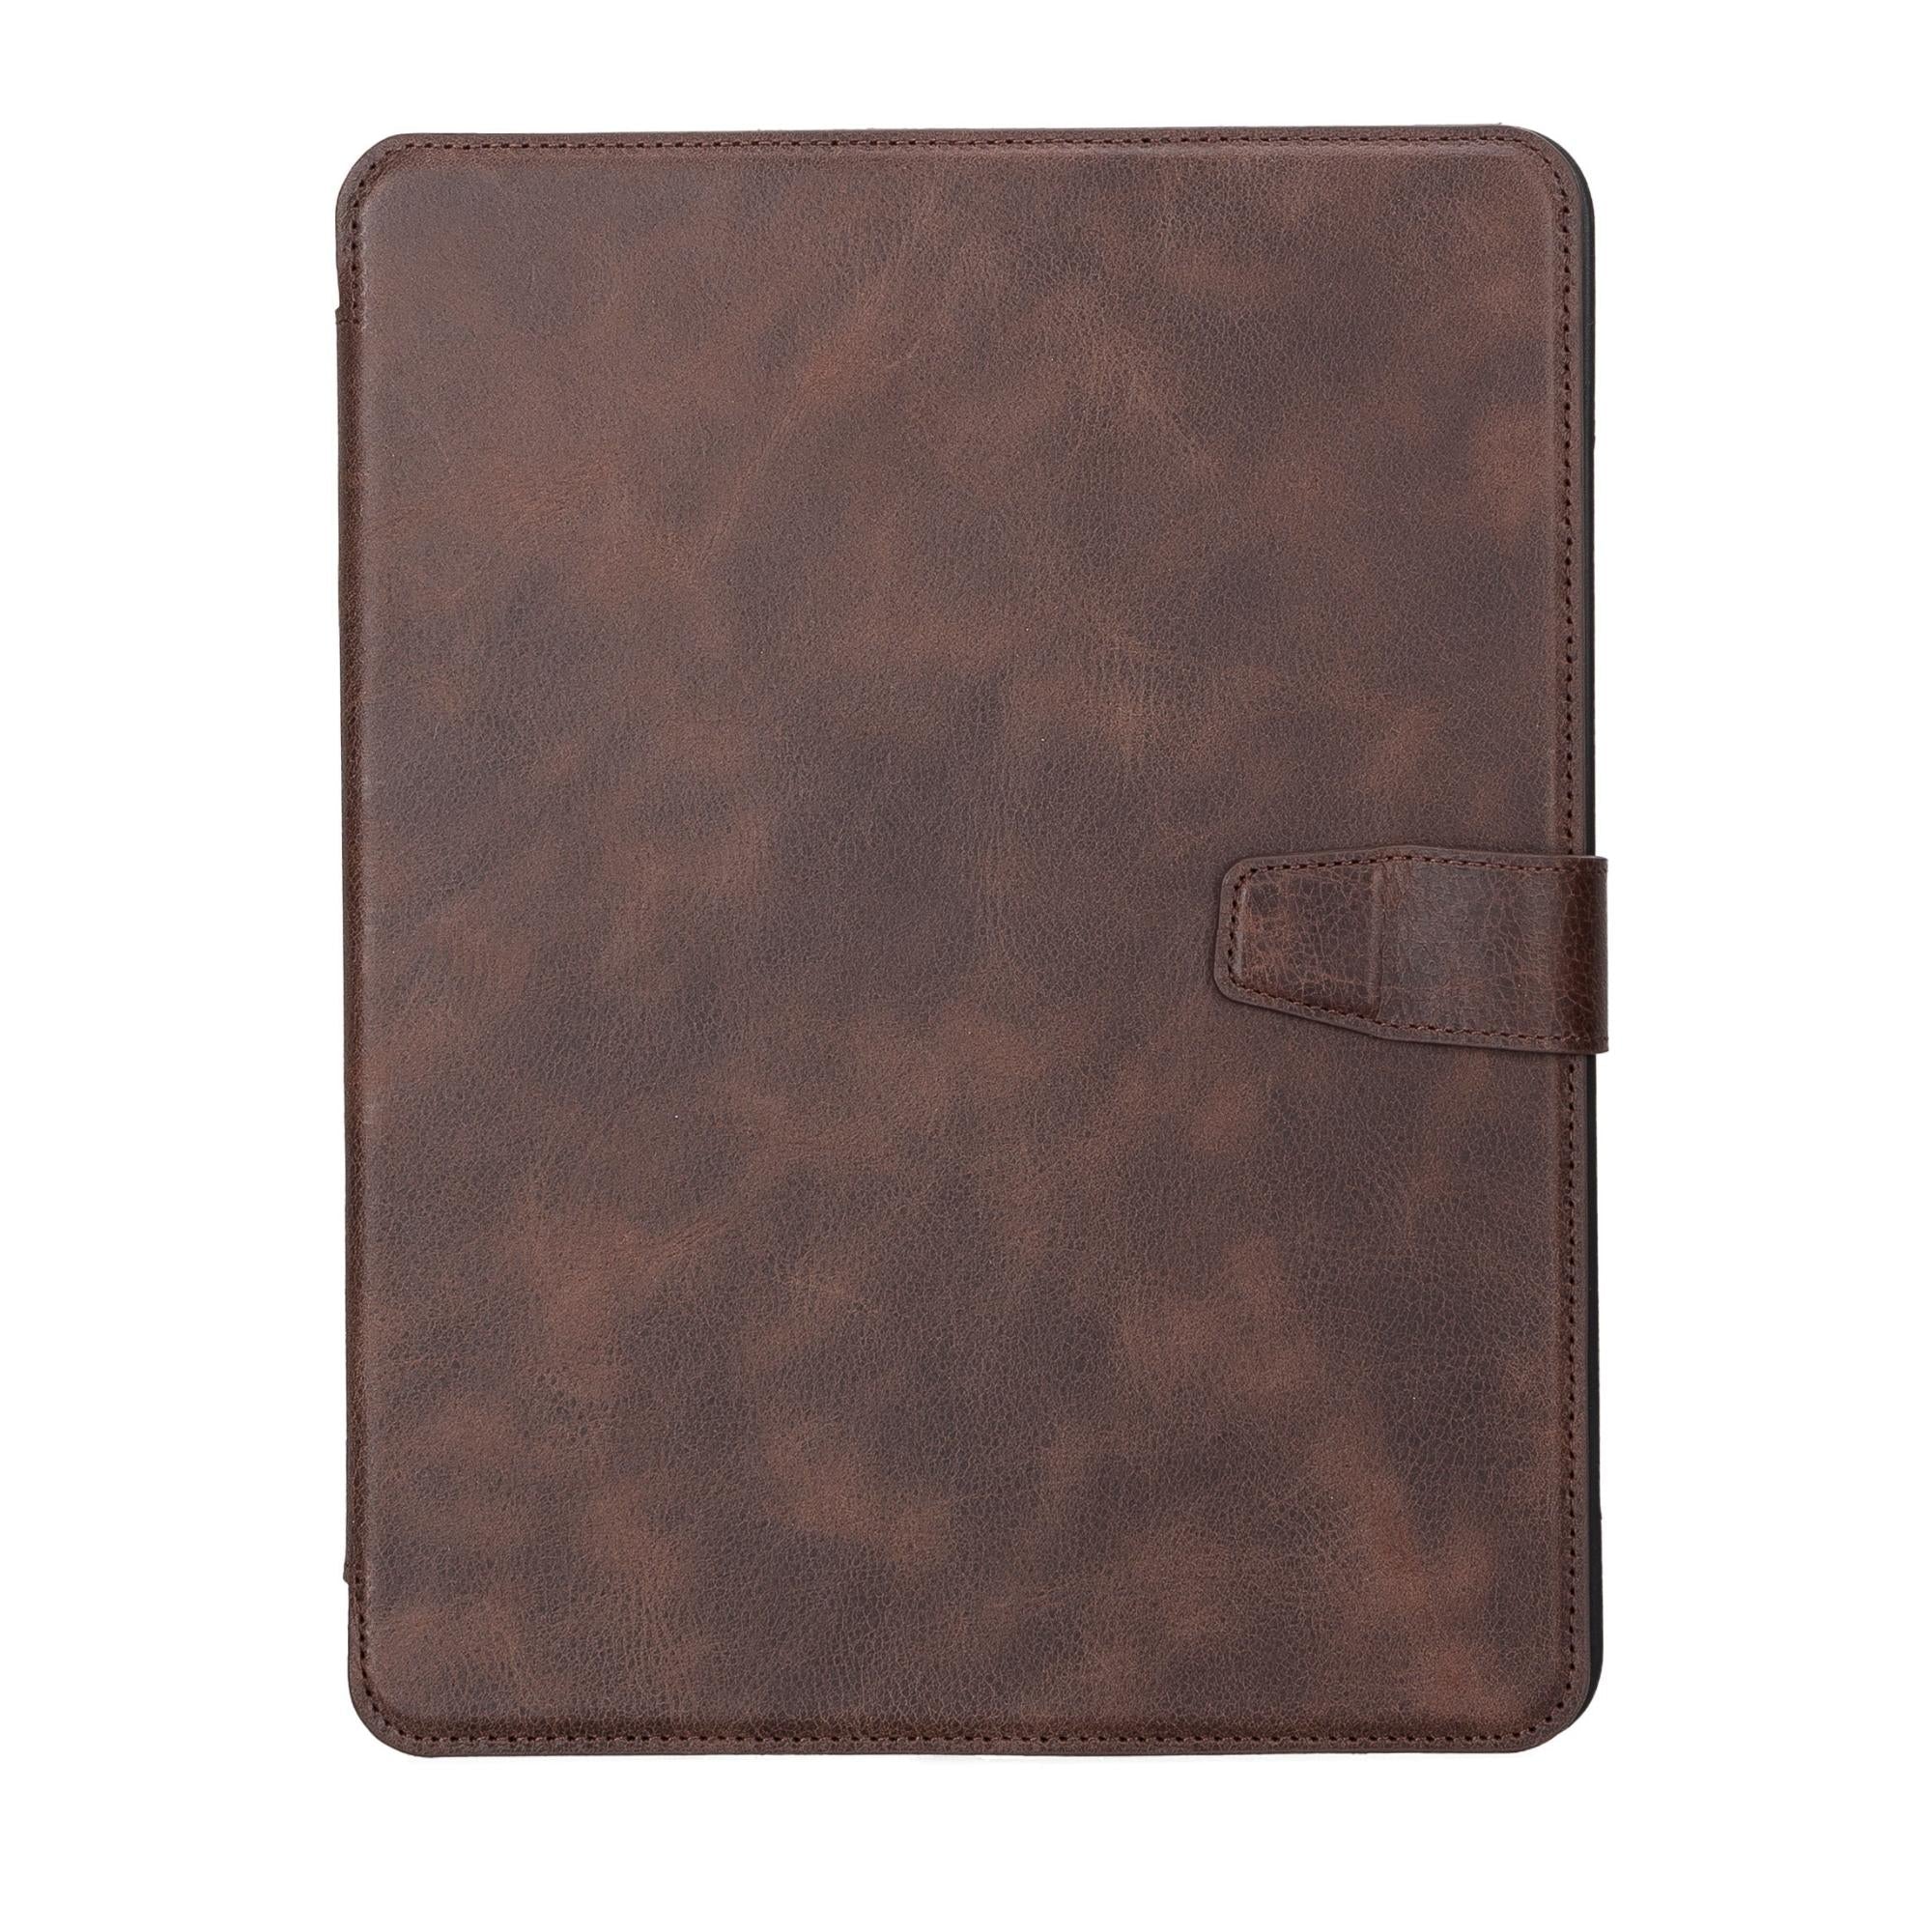 Albany Leather Wallet Case for iPad Pro 11-inch - Dark Brown - 5th Generation-2021 - TORONATA